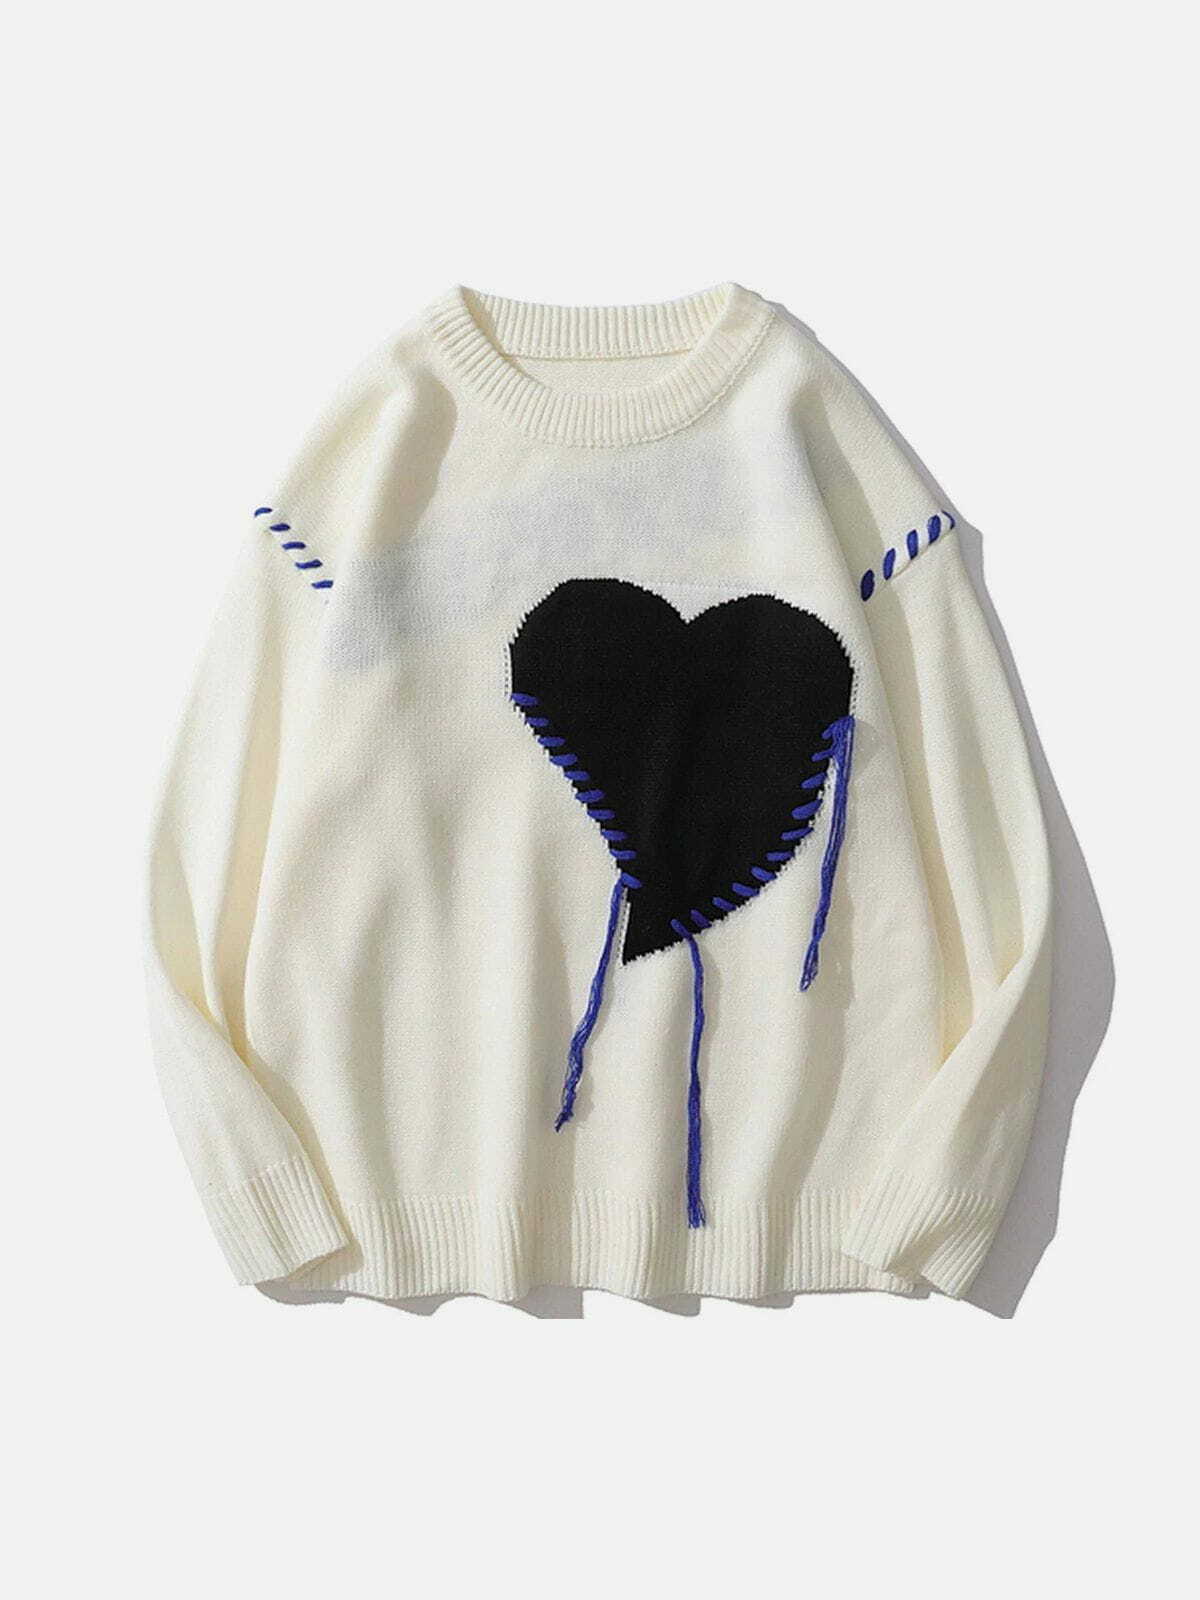 embroidered love sweater quirky y2k fashion charm 3289